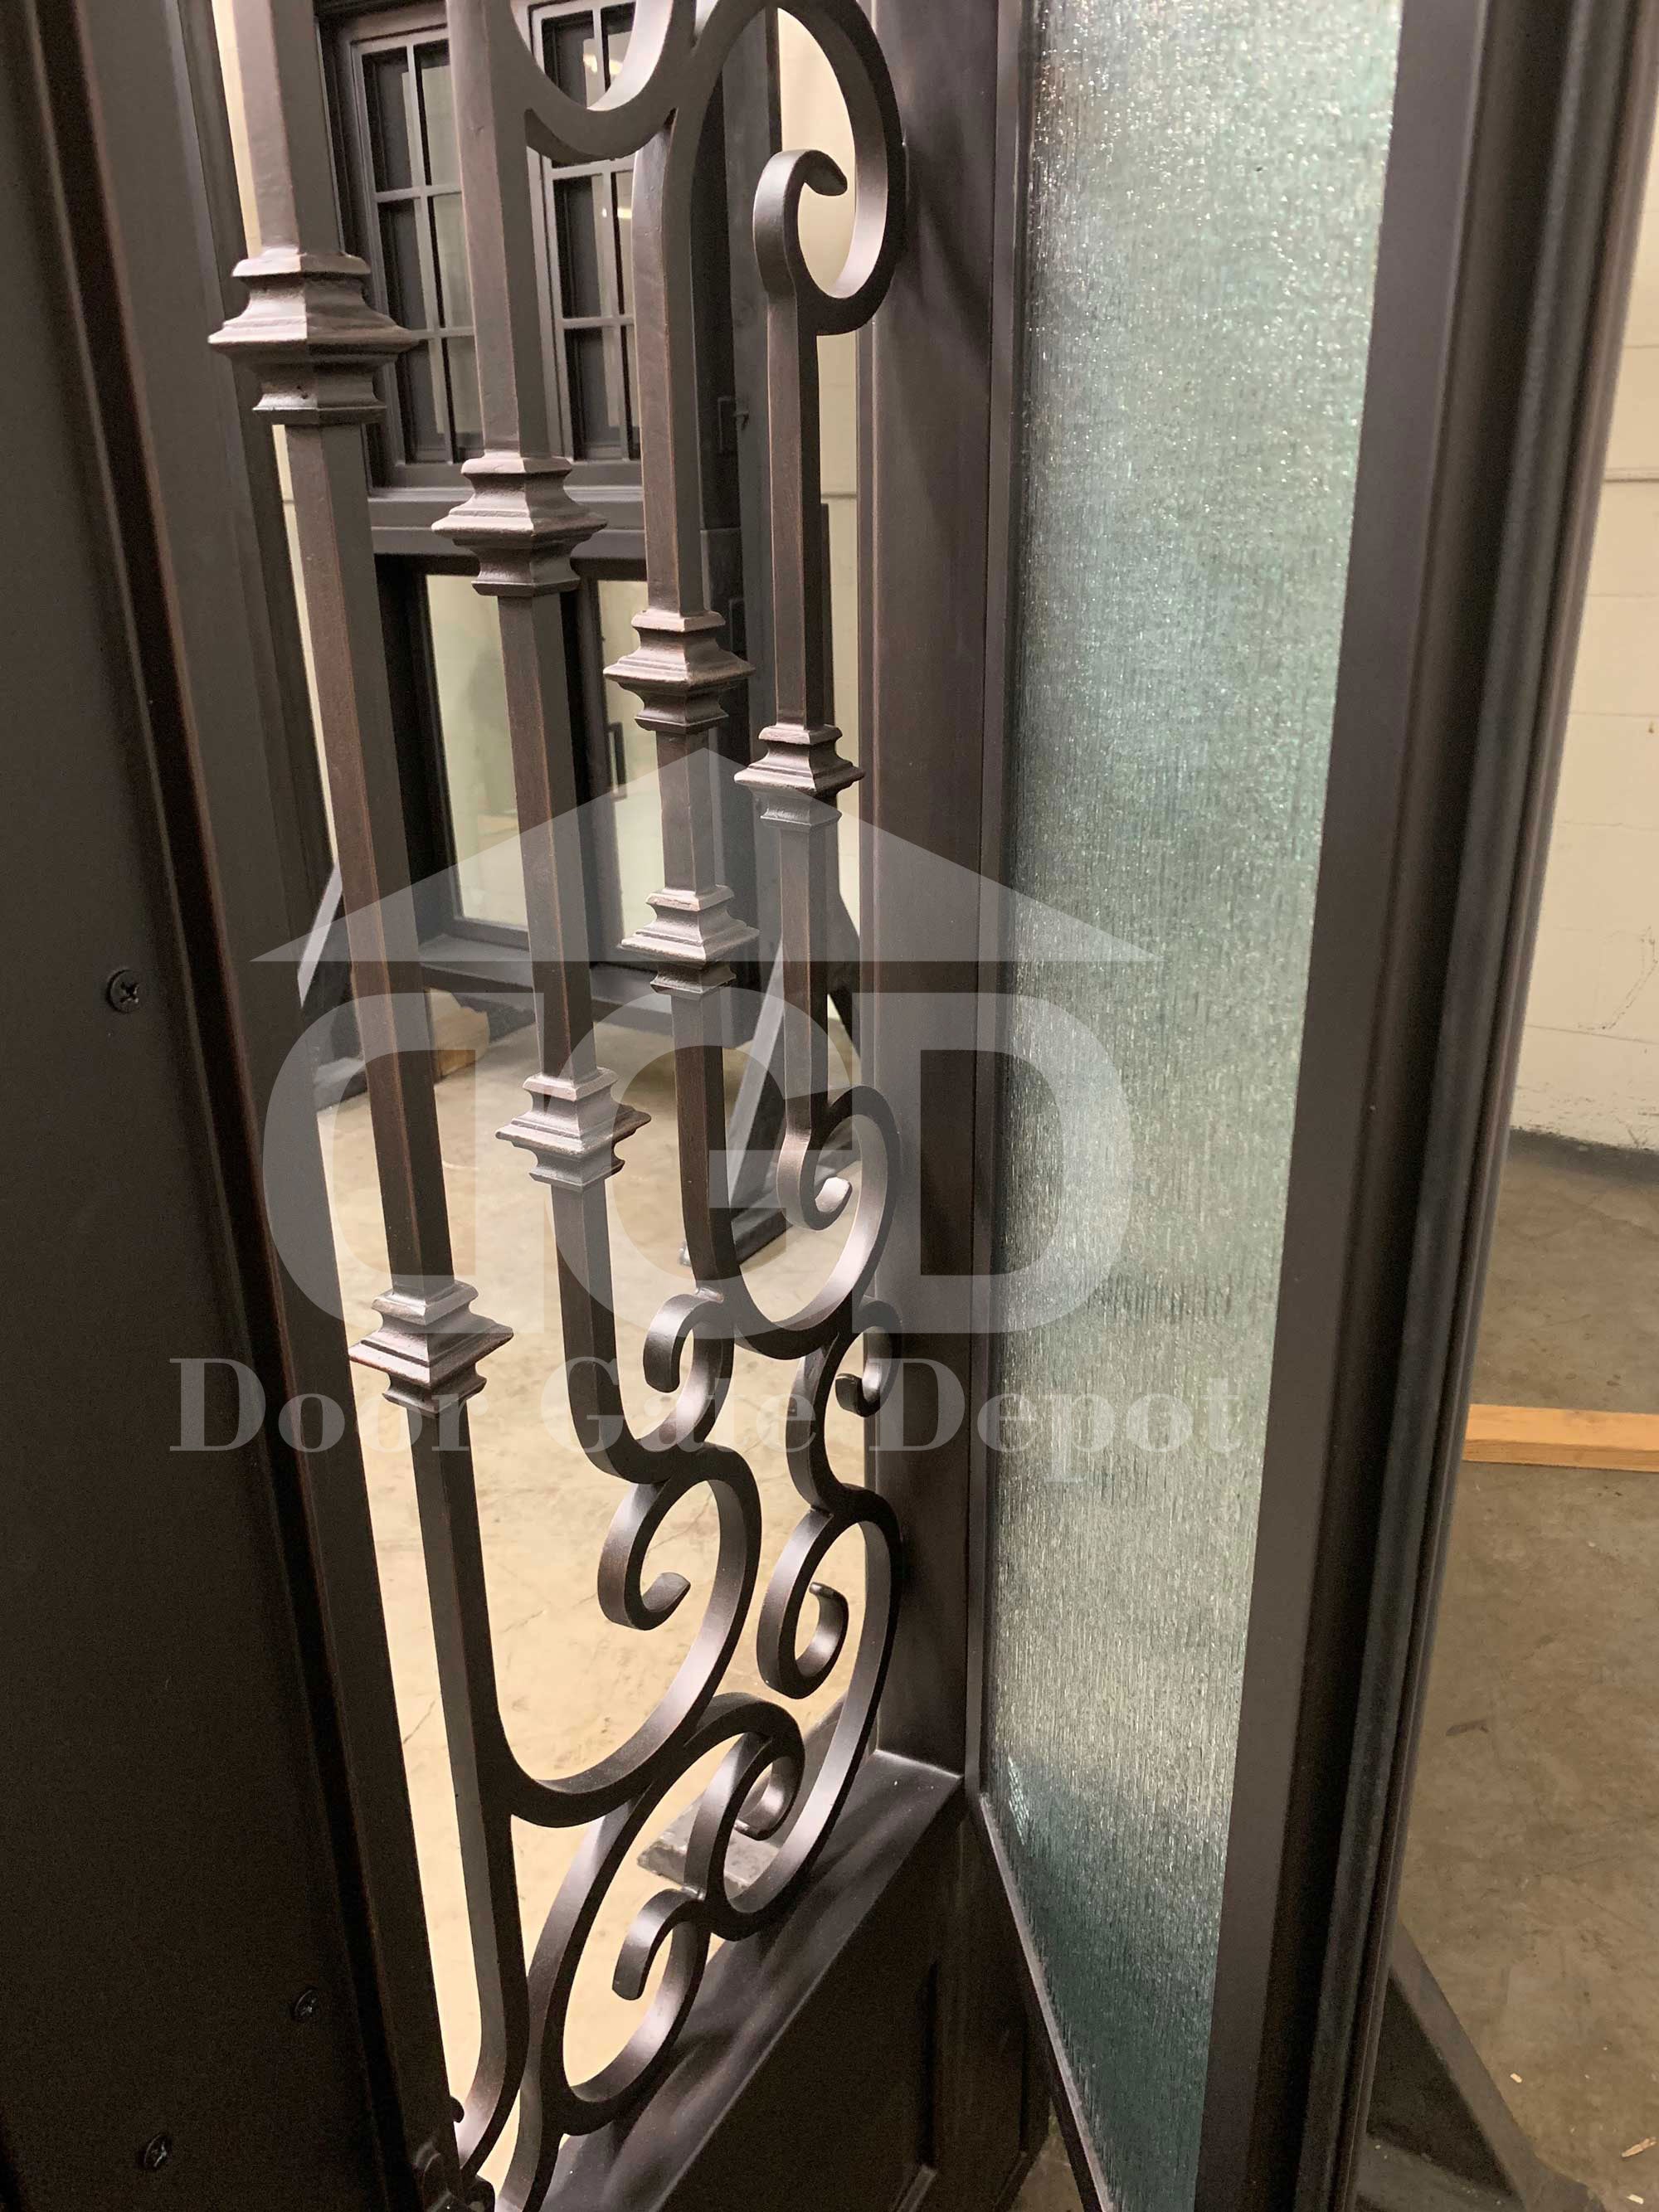 DAHLIA straight top inside arch, tempered insulated glass, removable bug screen, wrought iron doors-72x96 Right Hand - Door Gate Depot